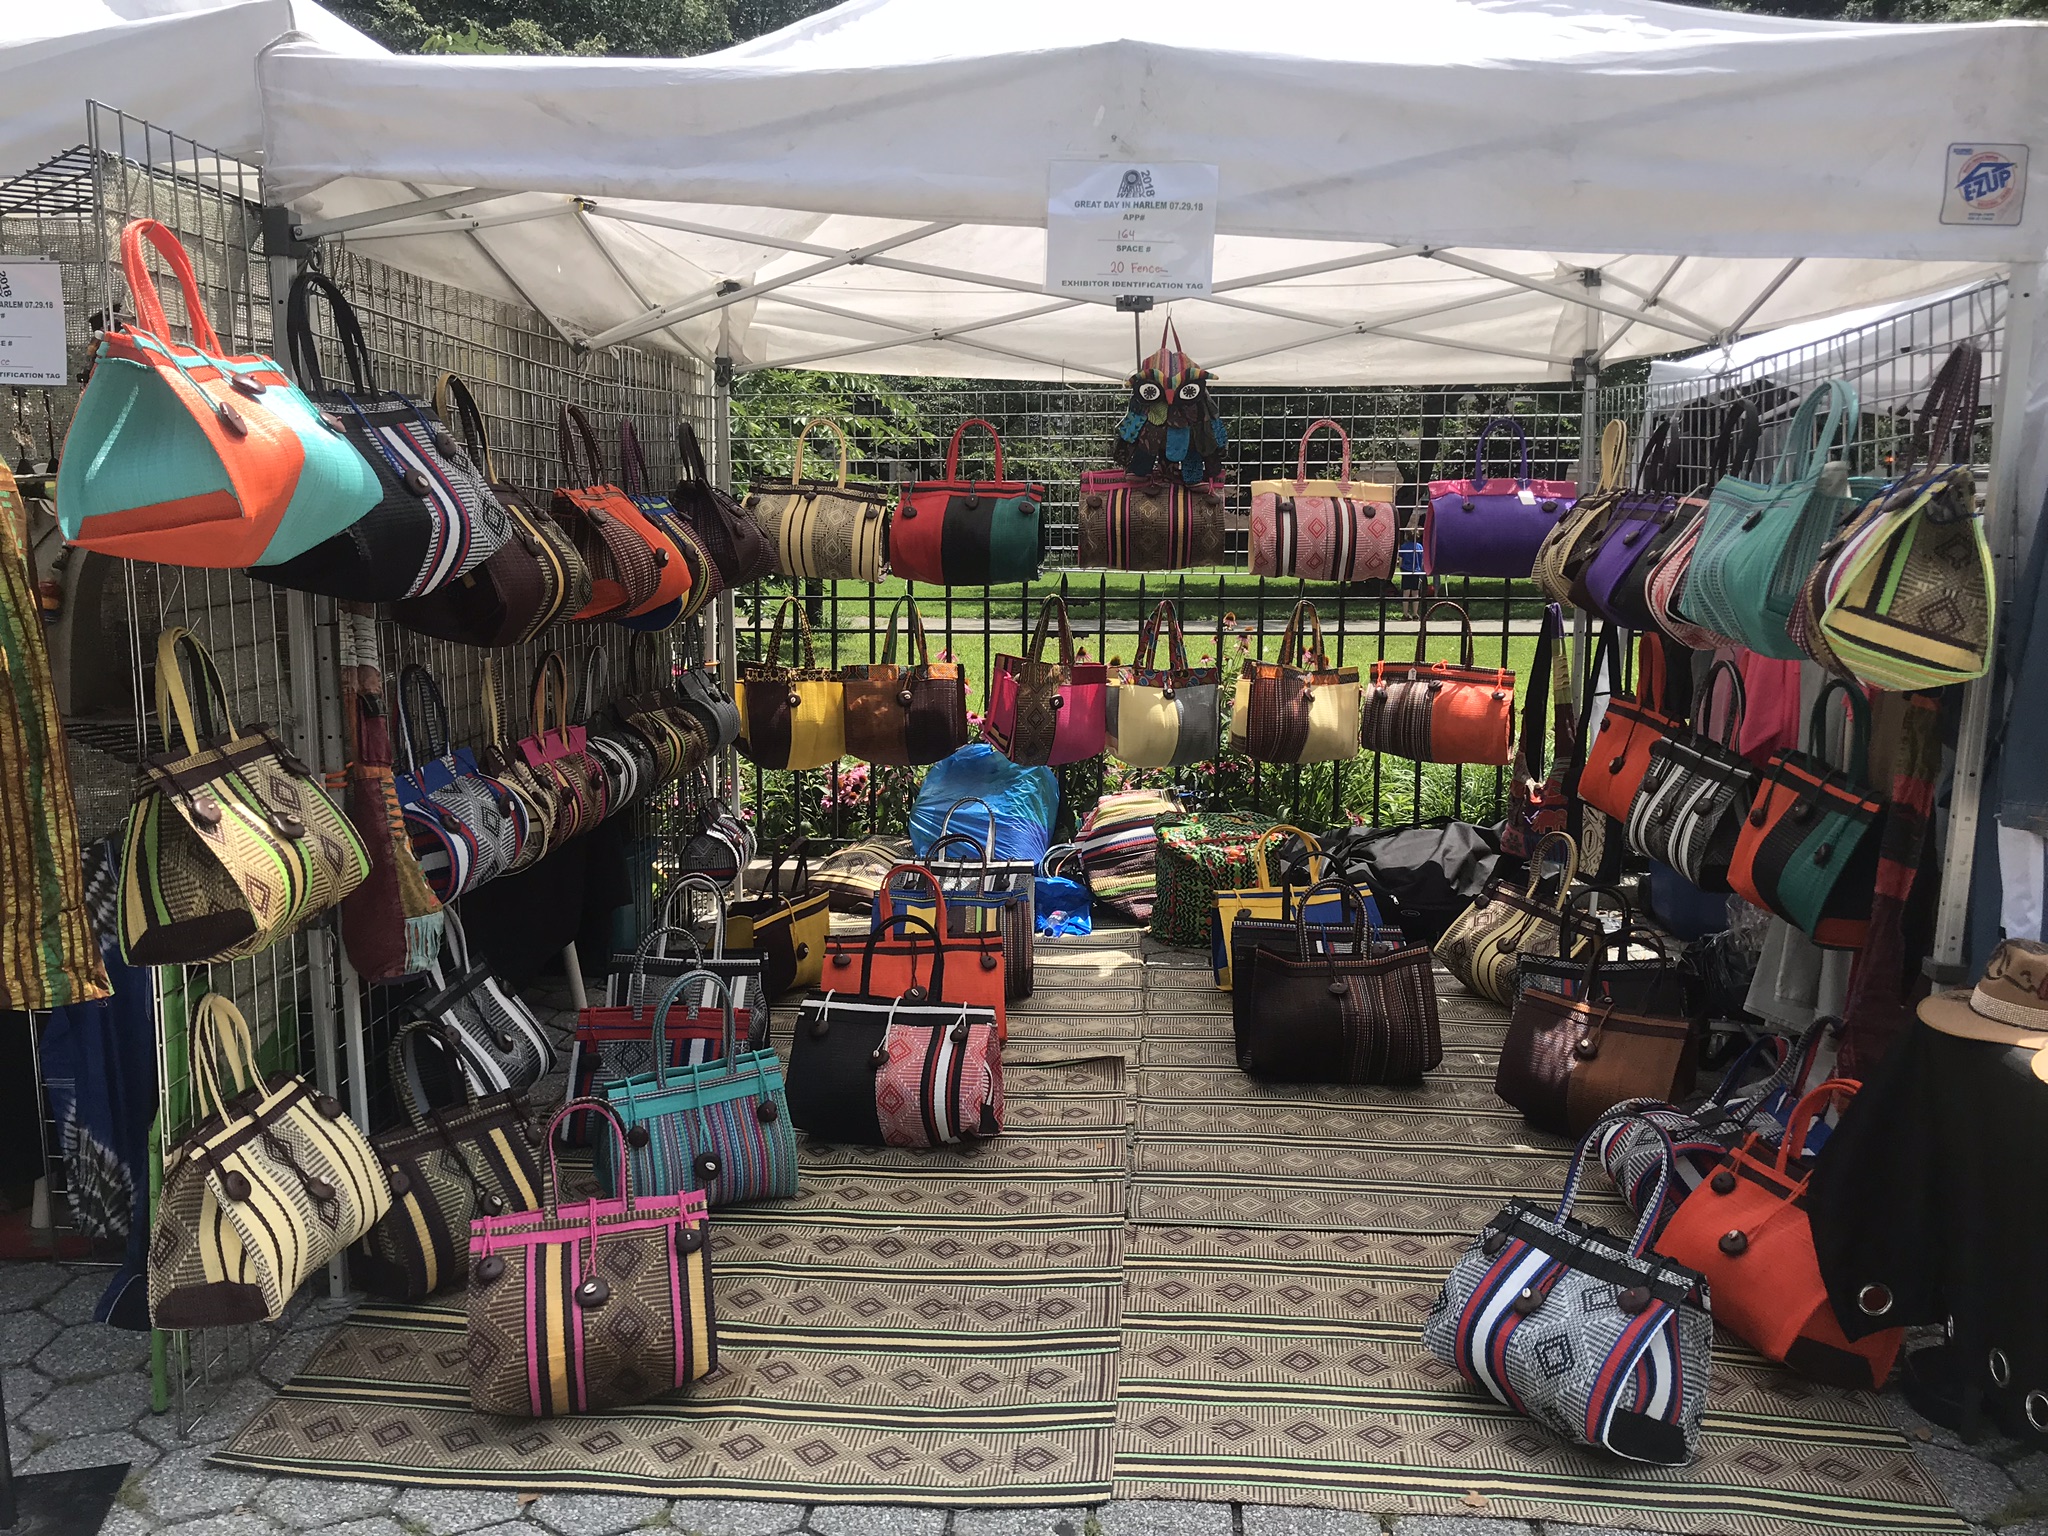 recycled handbag artist Adama Sylla's booth showing many colorful bags